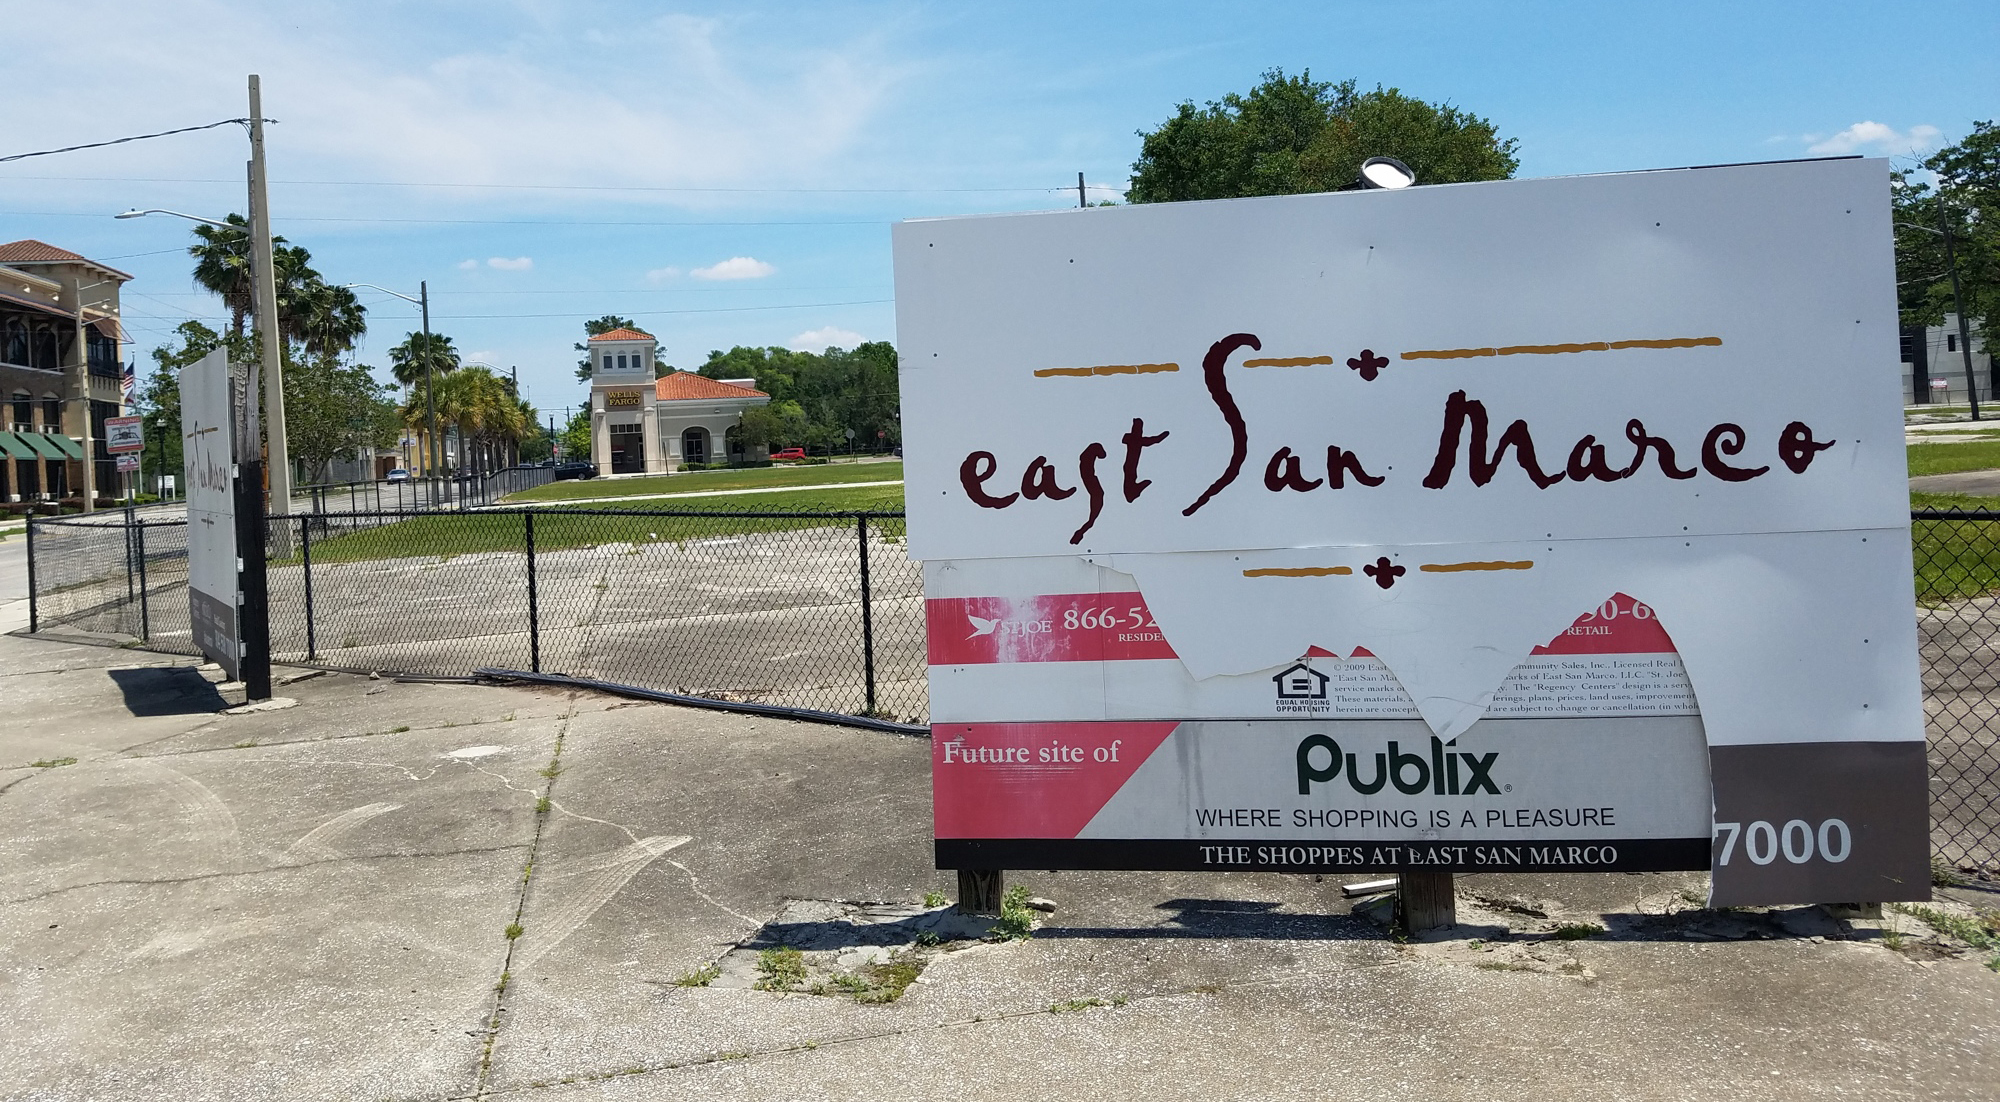 East San Marco has been in development for 17 years.